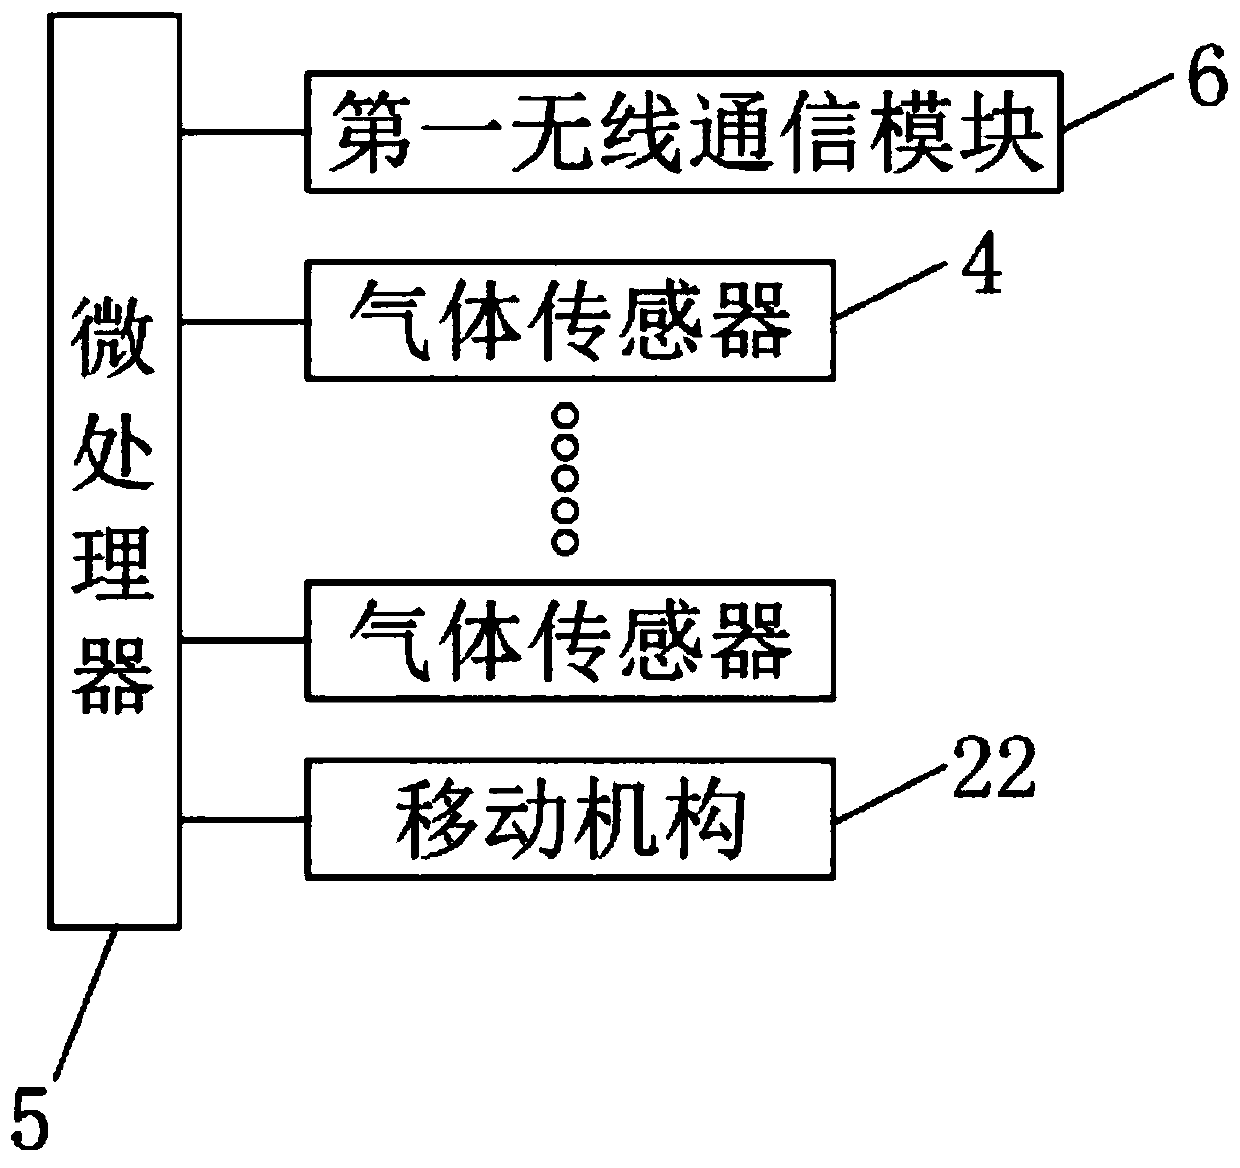 Laboratory safety monitoring system and working method thereof